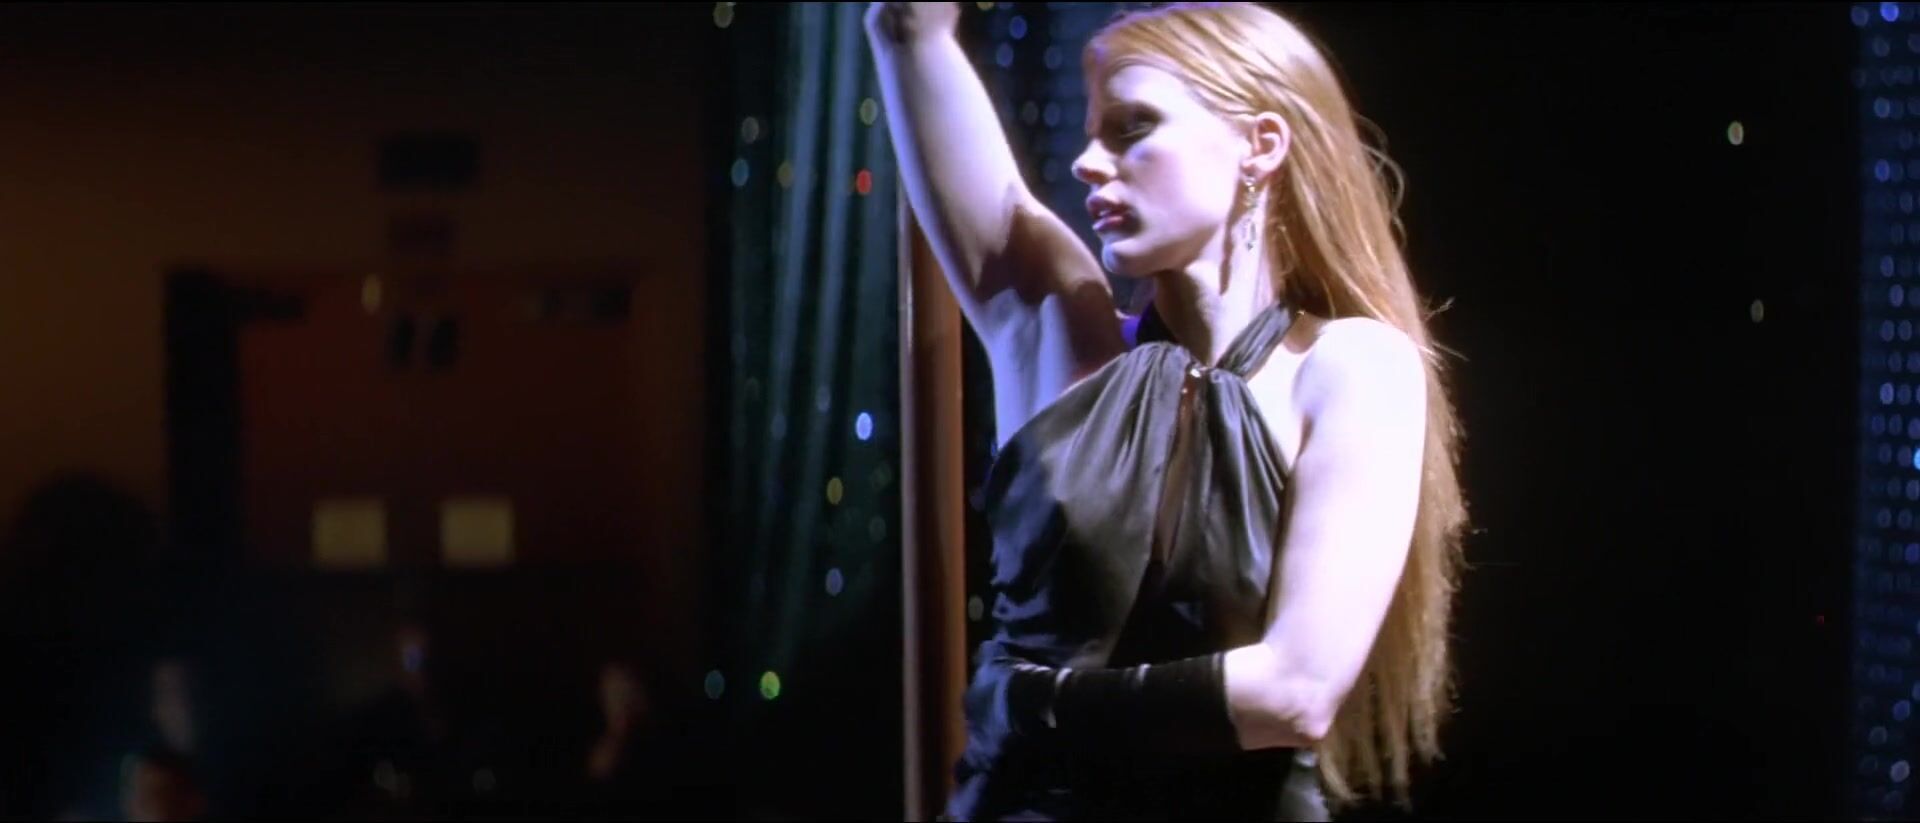 Camsex Jessica Chastain moves around pole and pulls dress down showing boobies in Jolene (2008) Dress